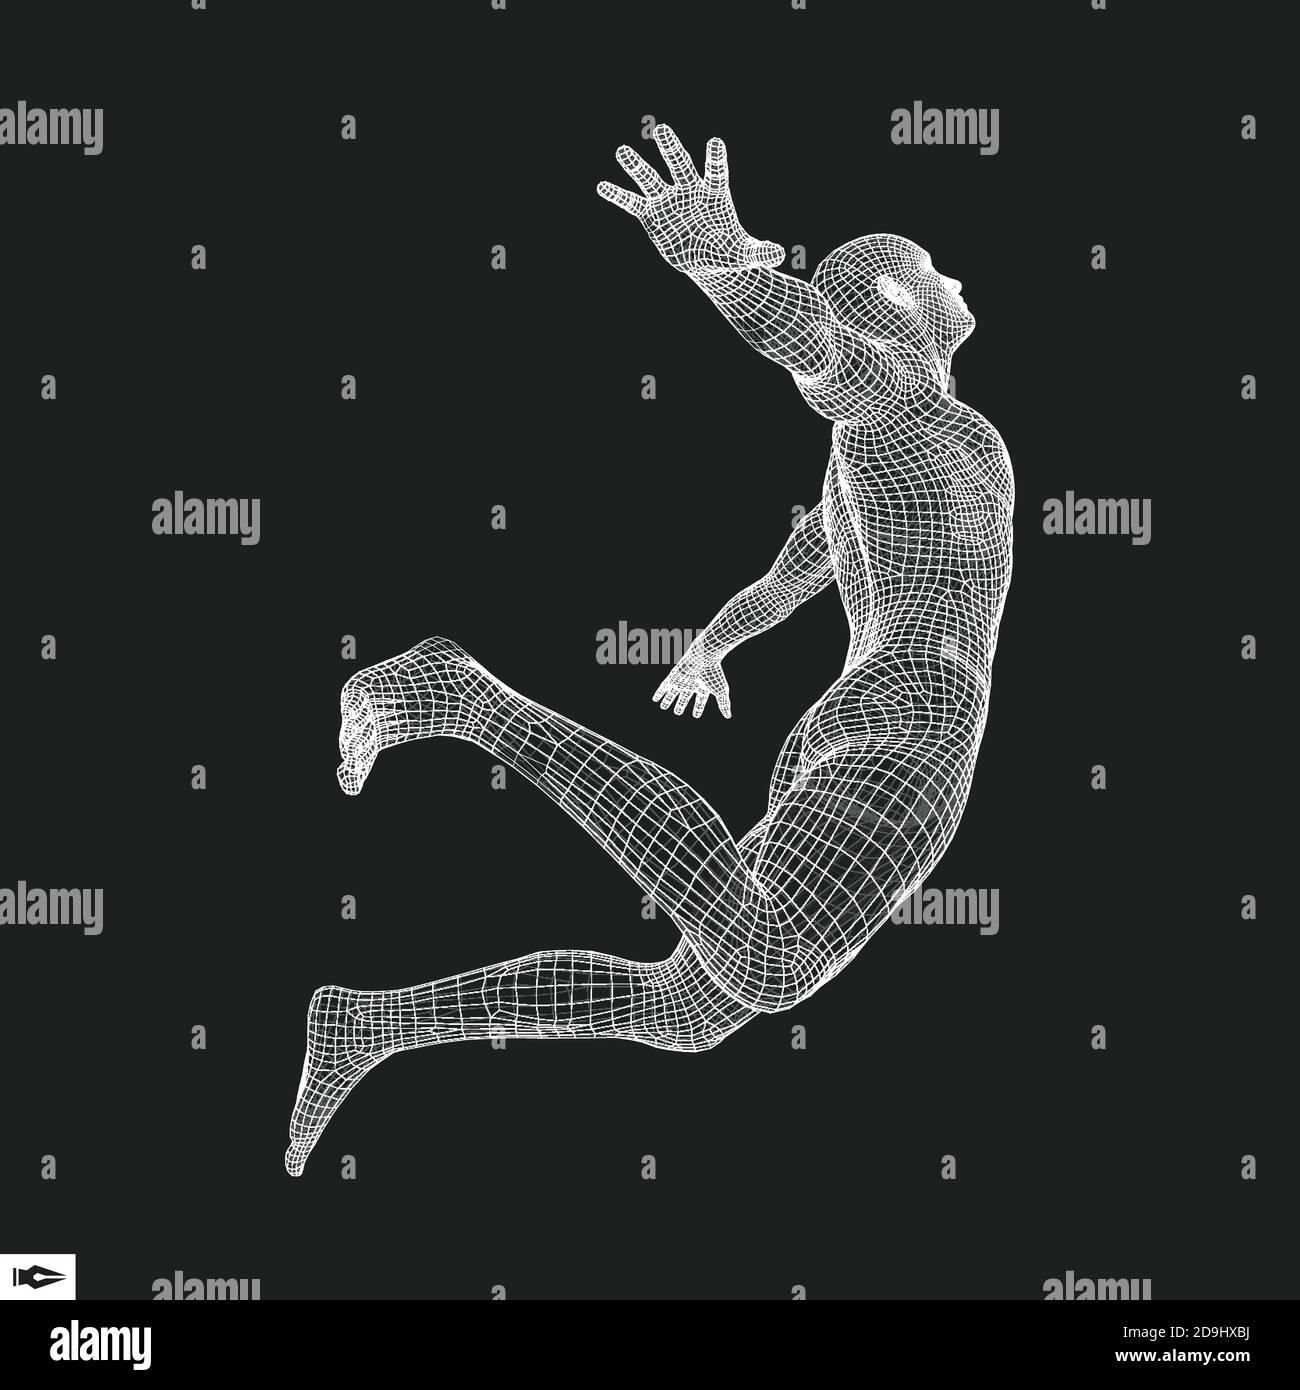 Jump Man. Polygonal Design. 3D Model of Man. Geometric Design. Business, Science and Technology Vector Illustration. 3d Polygonal Covering Skin. Human Stock Vector